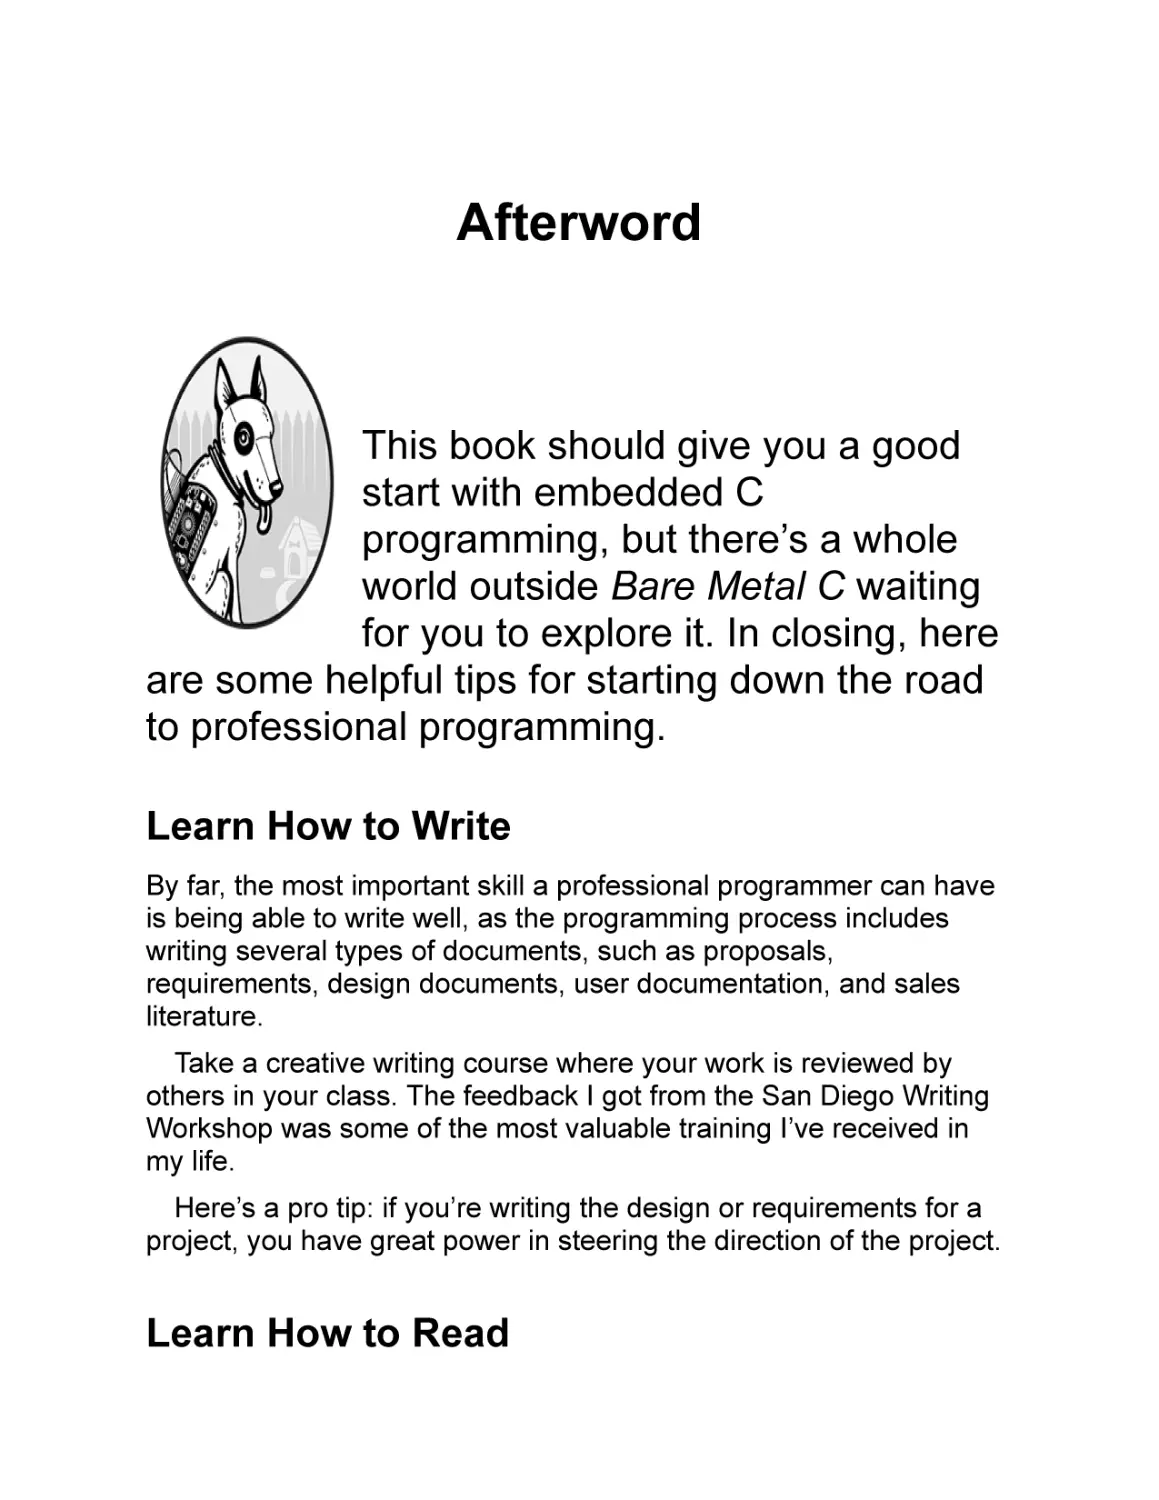 Afterword
Learn How to Write
Learn How to Read